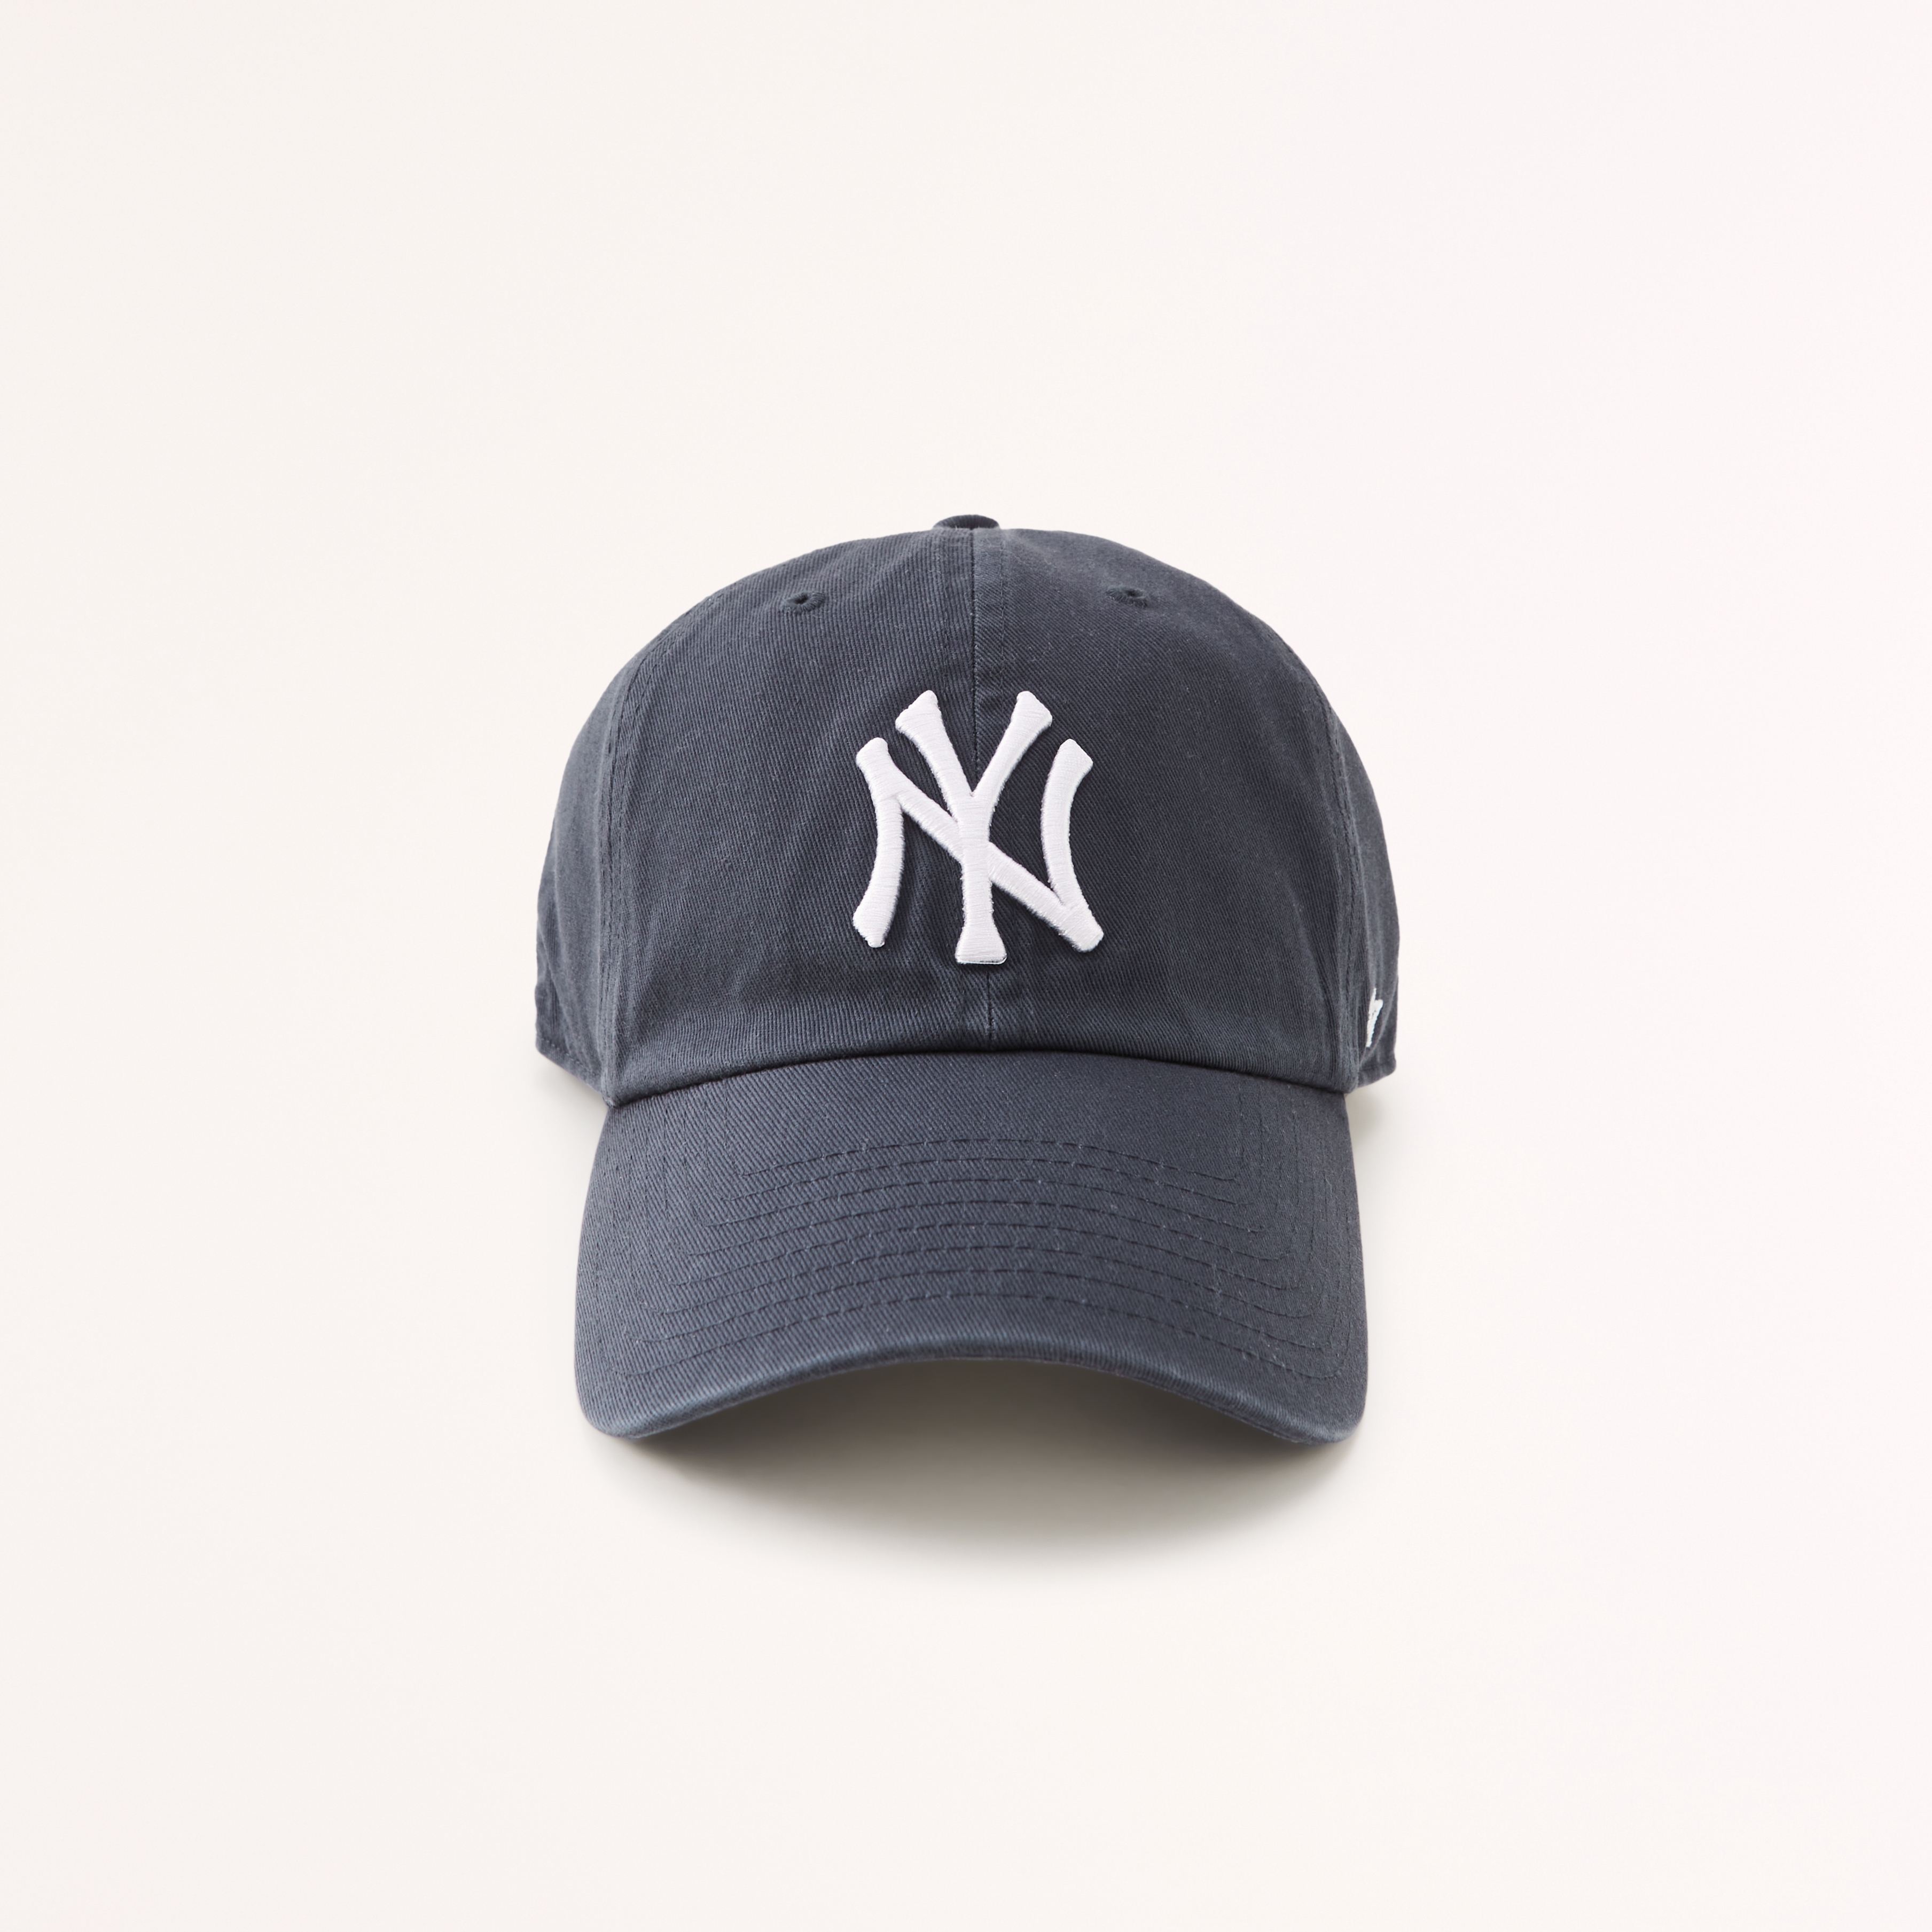 Men's New York Yankees Dad Hat in Light Brown | Size 1 Size | Abercrombie & Fitch